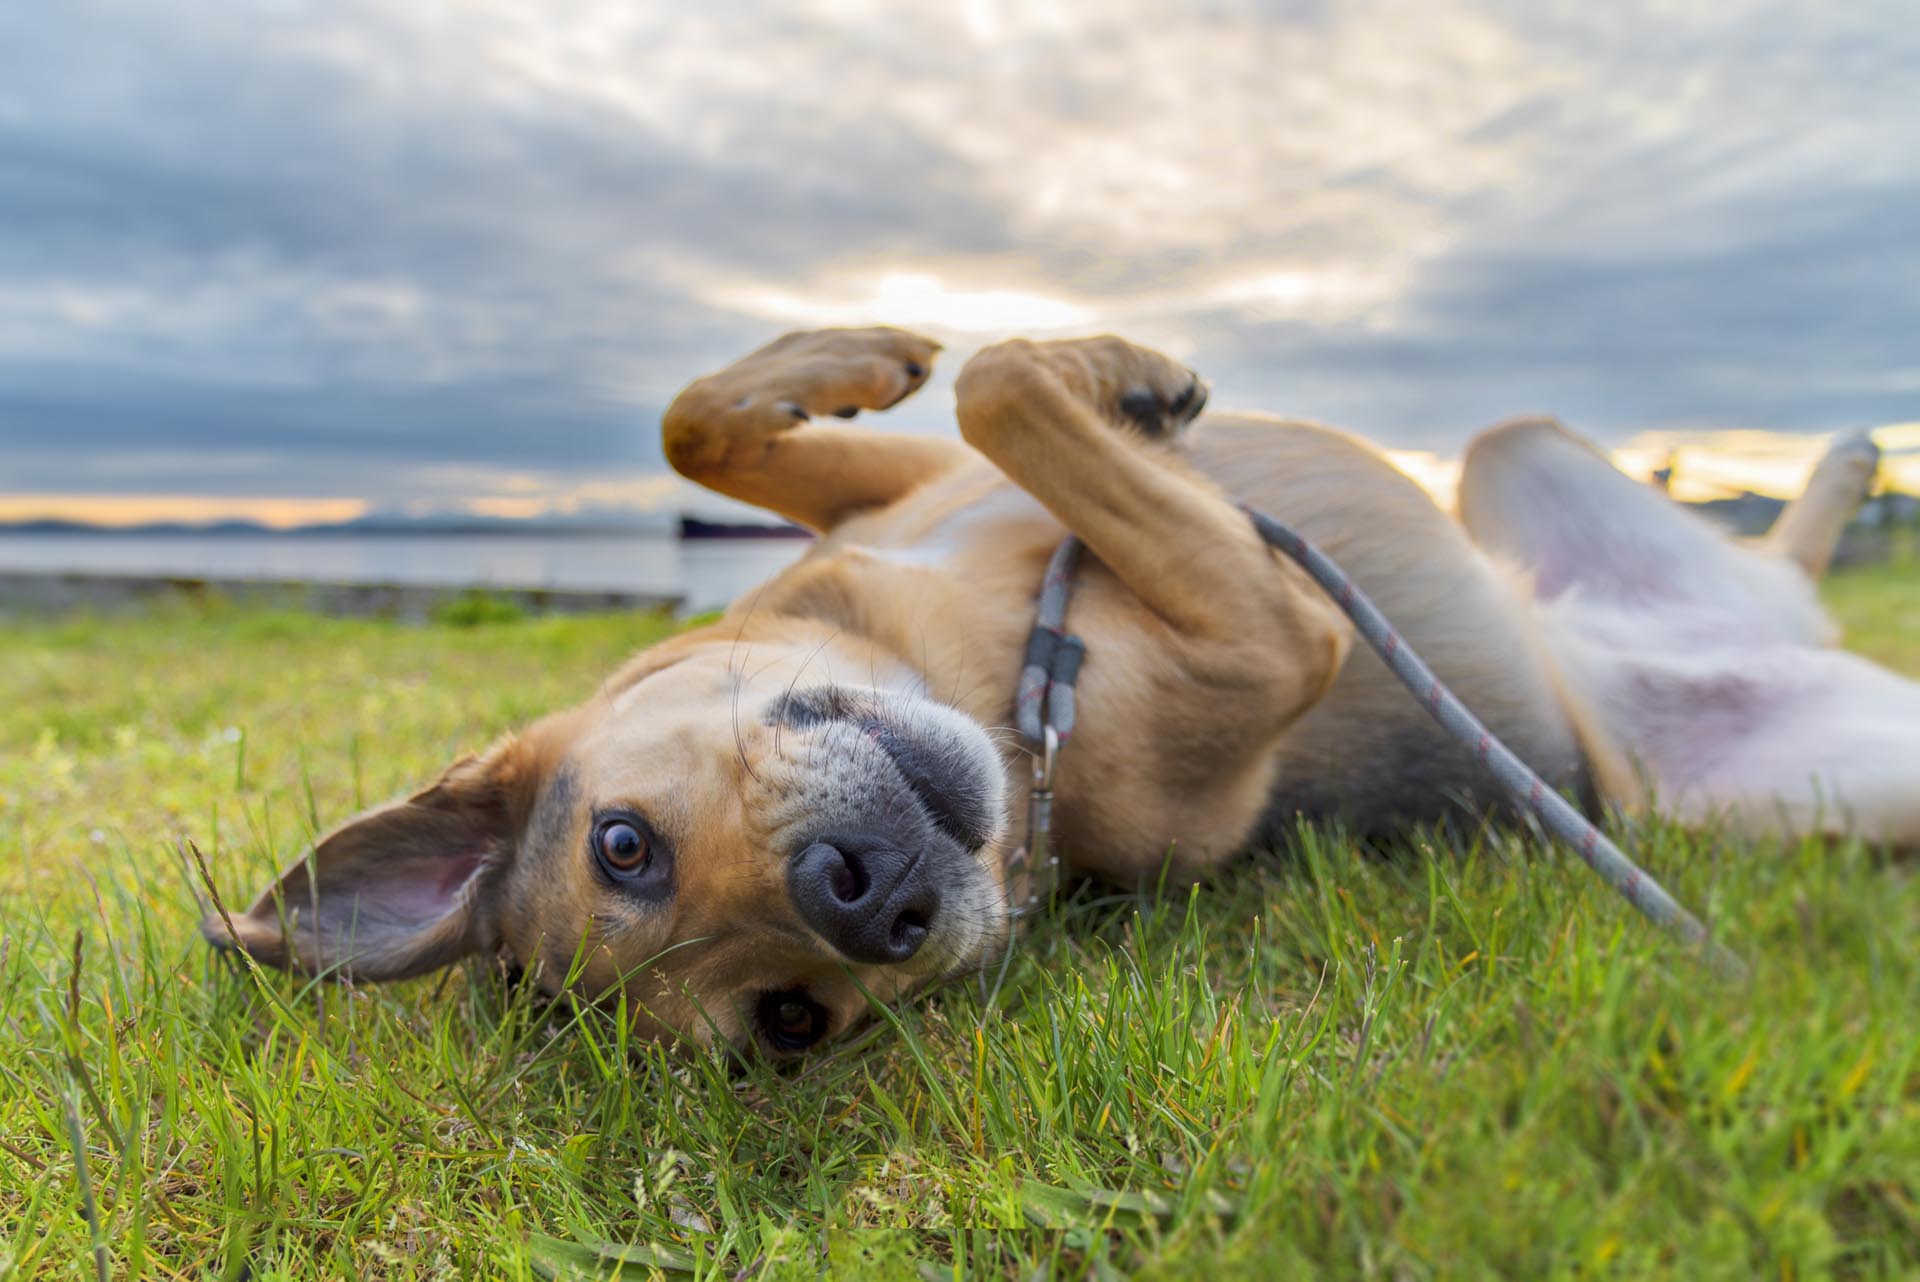 Dog rolling around in the grass